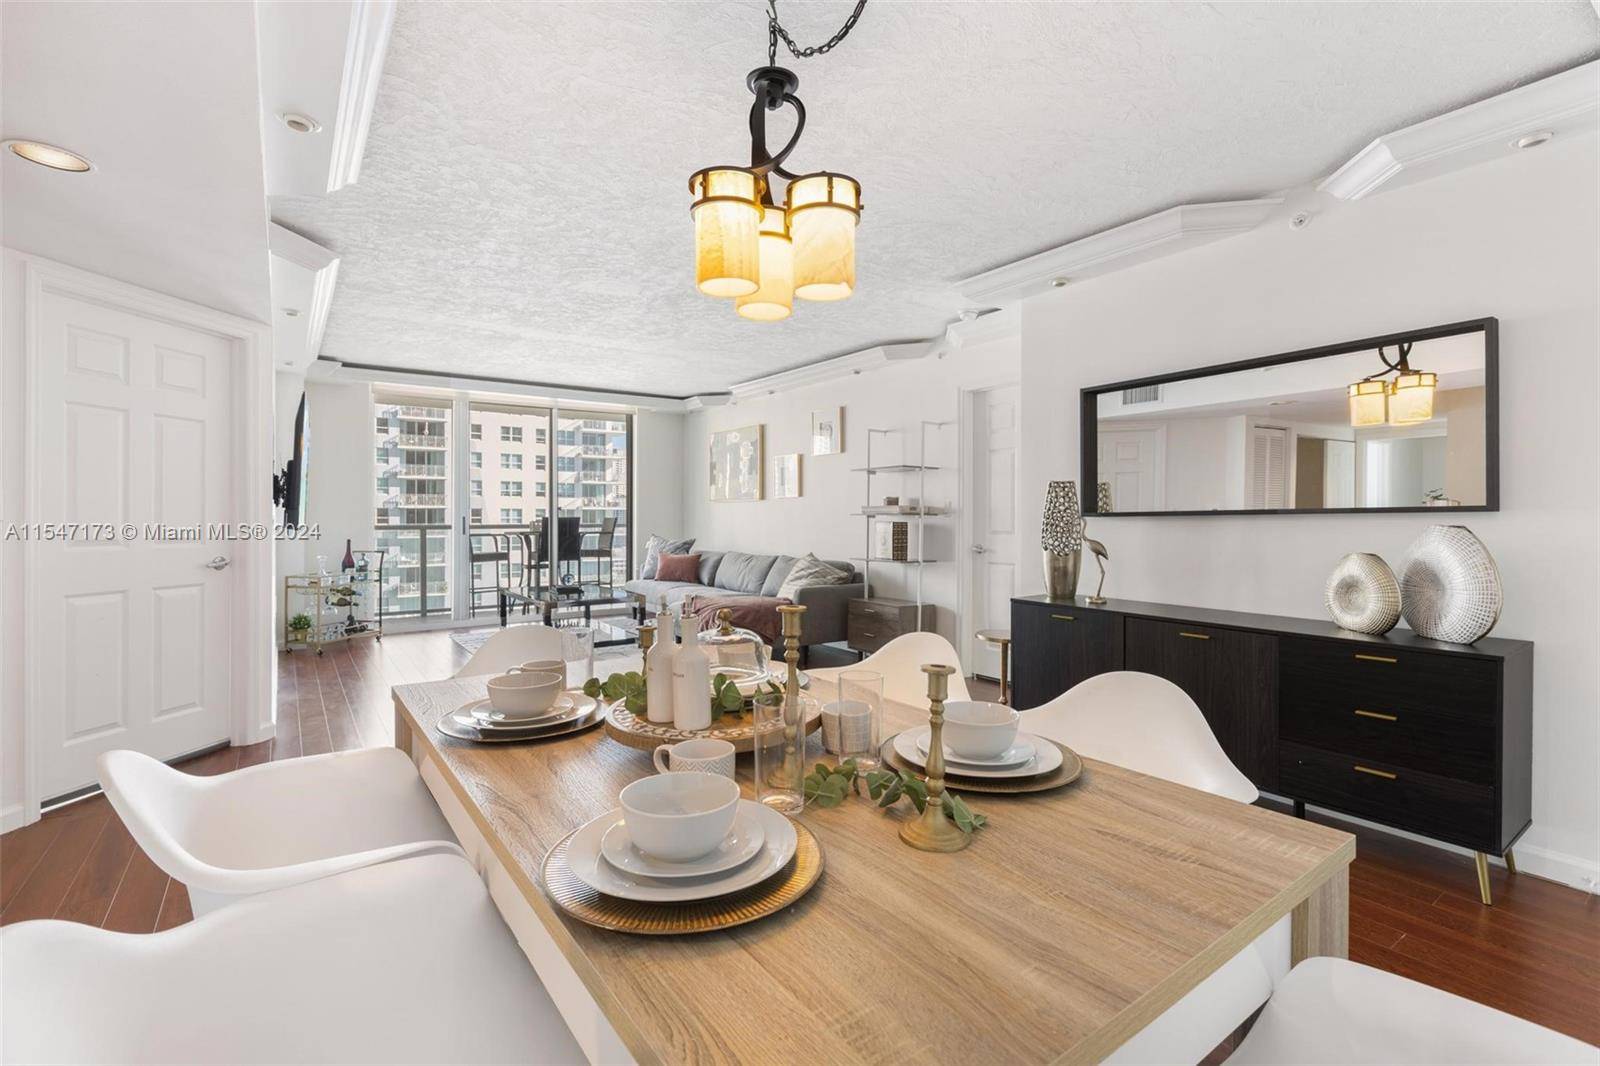 Fully furnished turnkey 3 bed 2 bath unit in the Mark on Brickell.